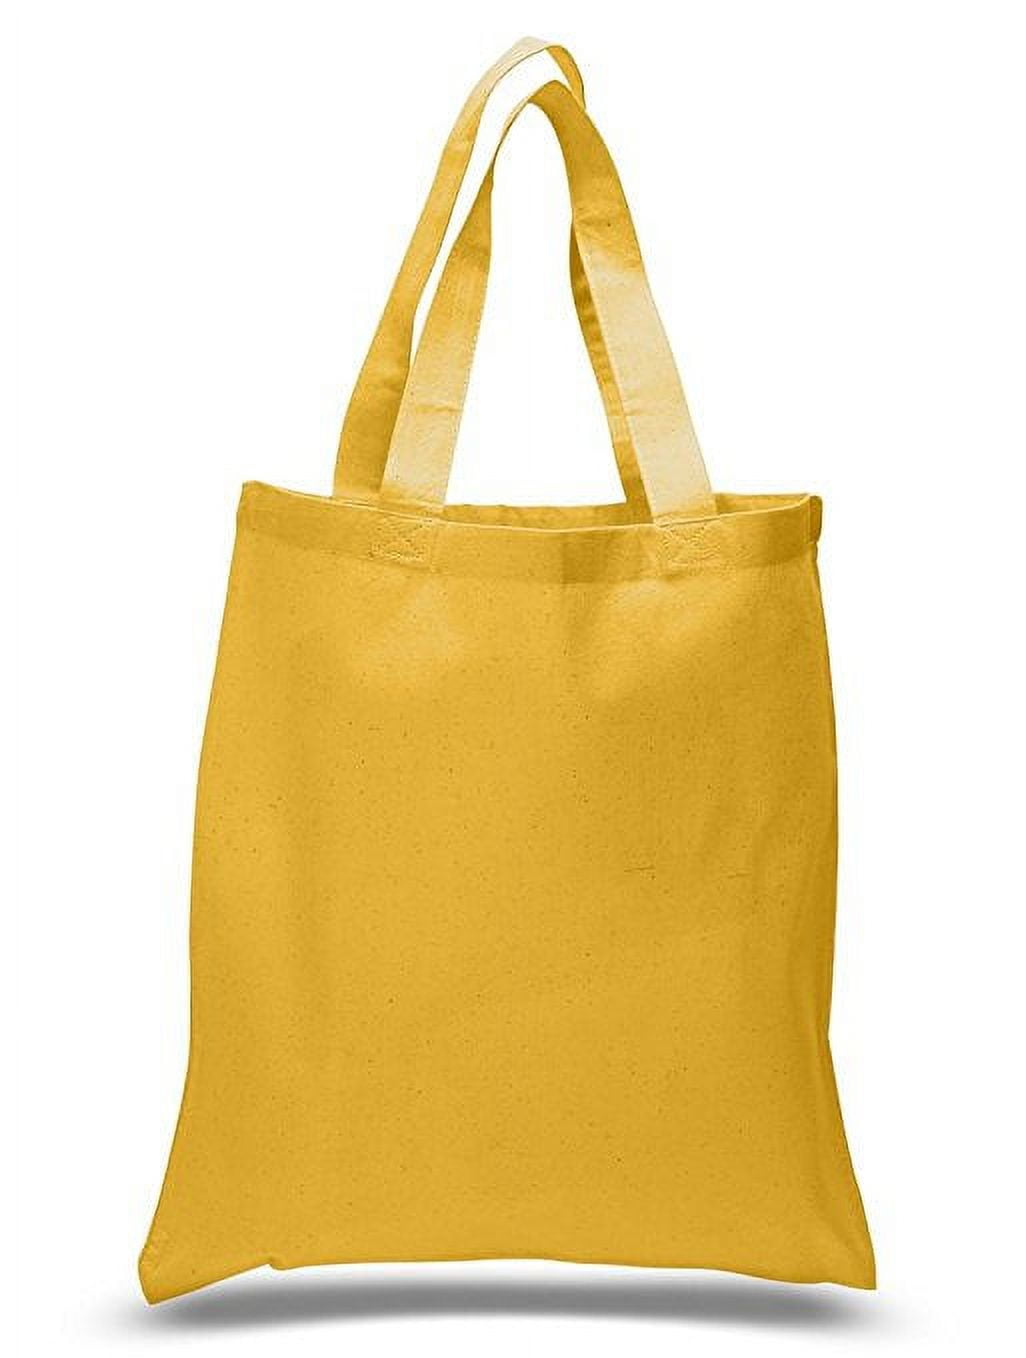 Resuable Blank Tote Bags for DIY, Art & Crafts, Decorations Set of 24 (Gold)